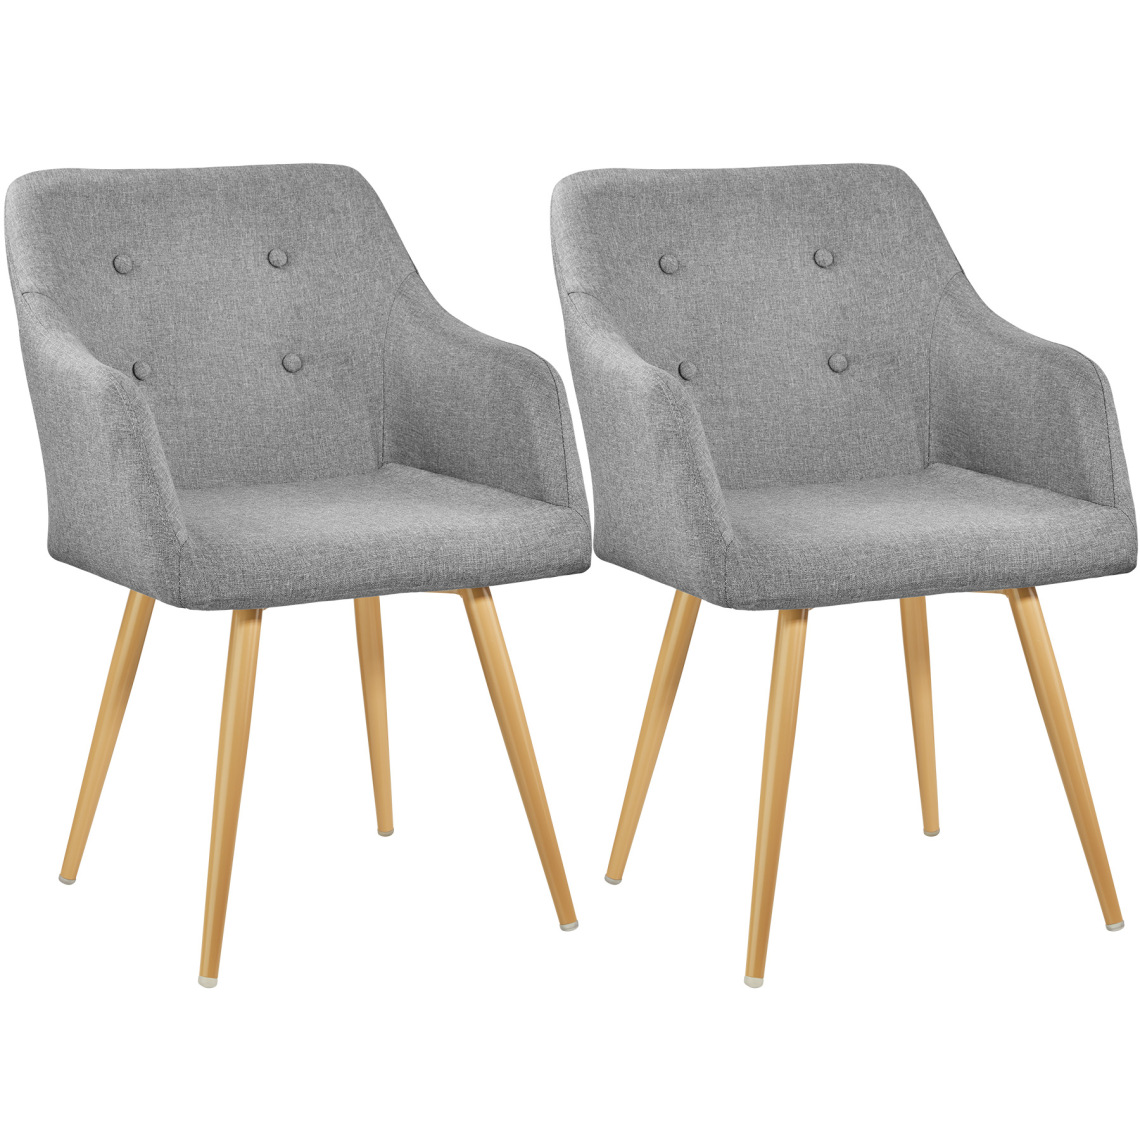 Tectake - 2 Chaises style scandinave TANJA - gris - Chaises